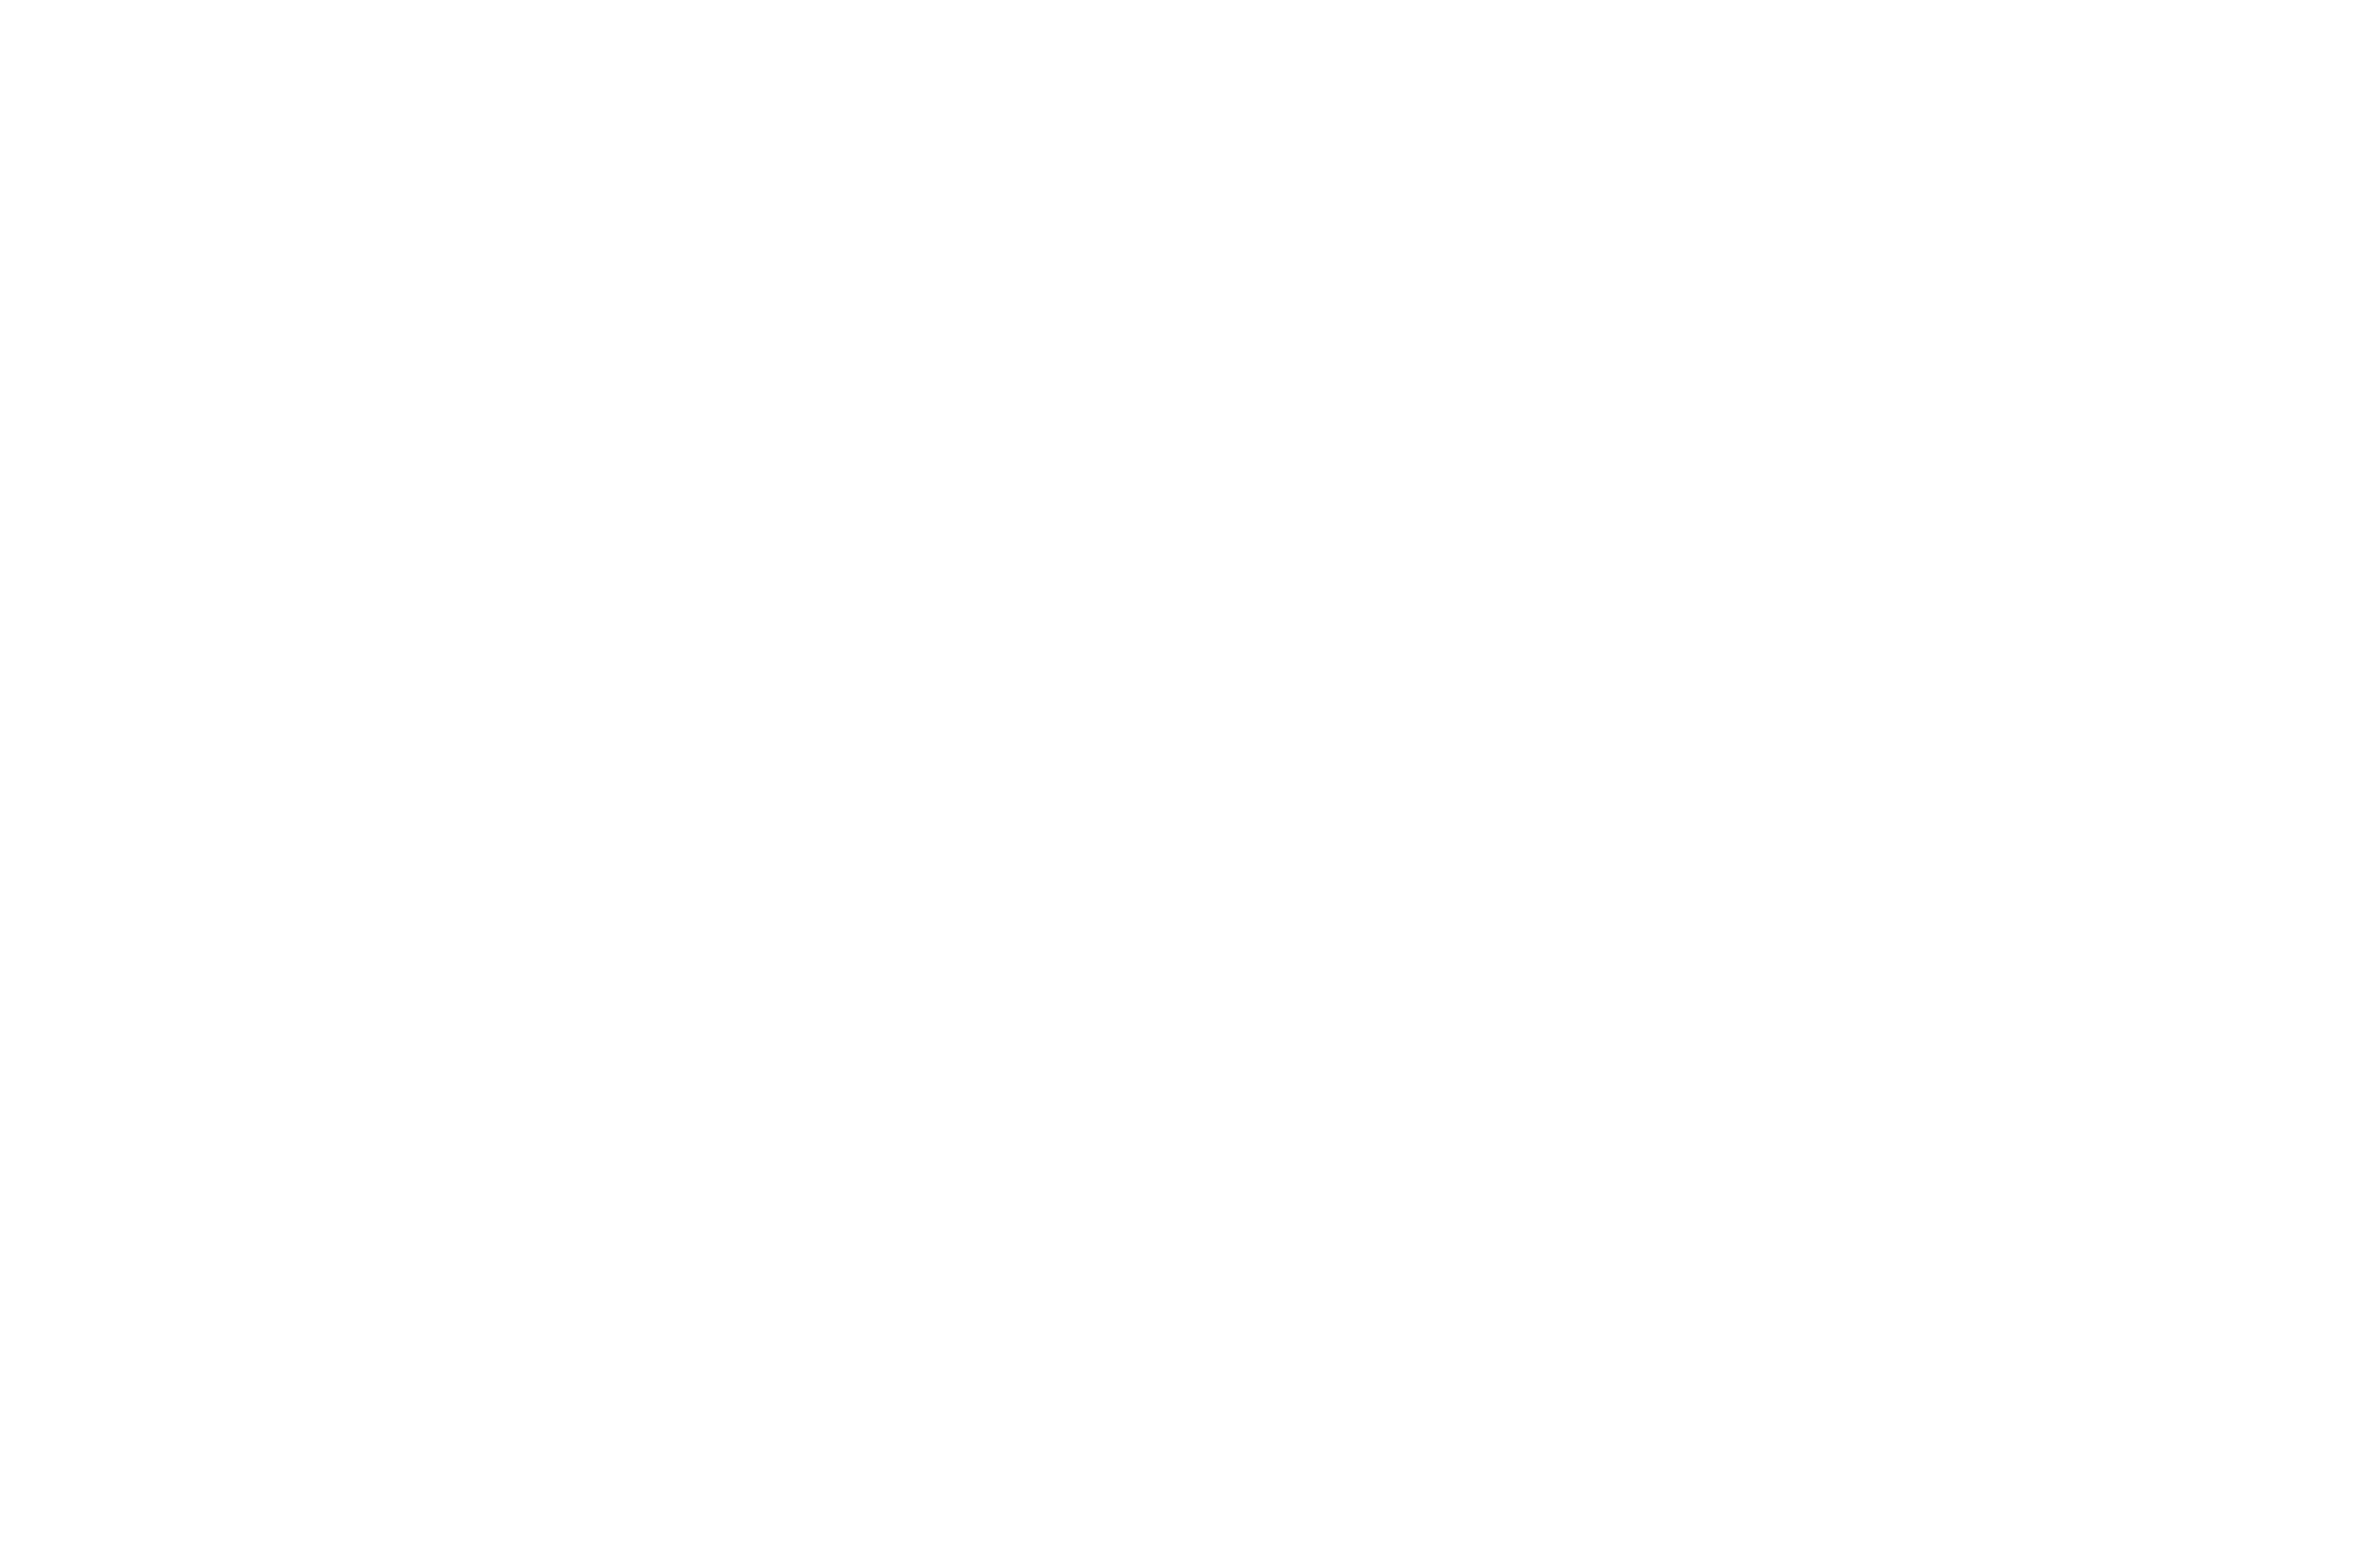 OFFICIALSELECTION-NorwichFilmFestival-2018-2.png